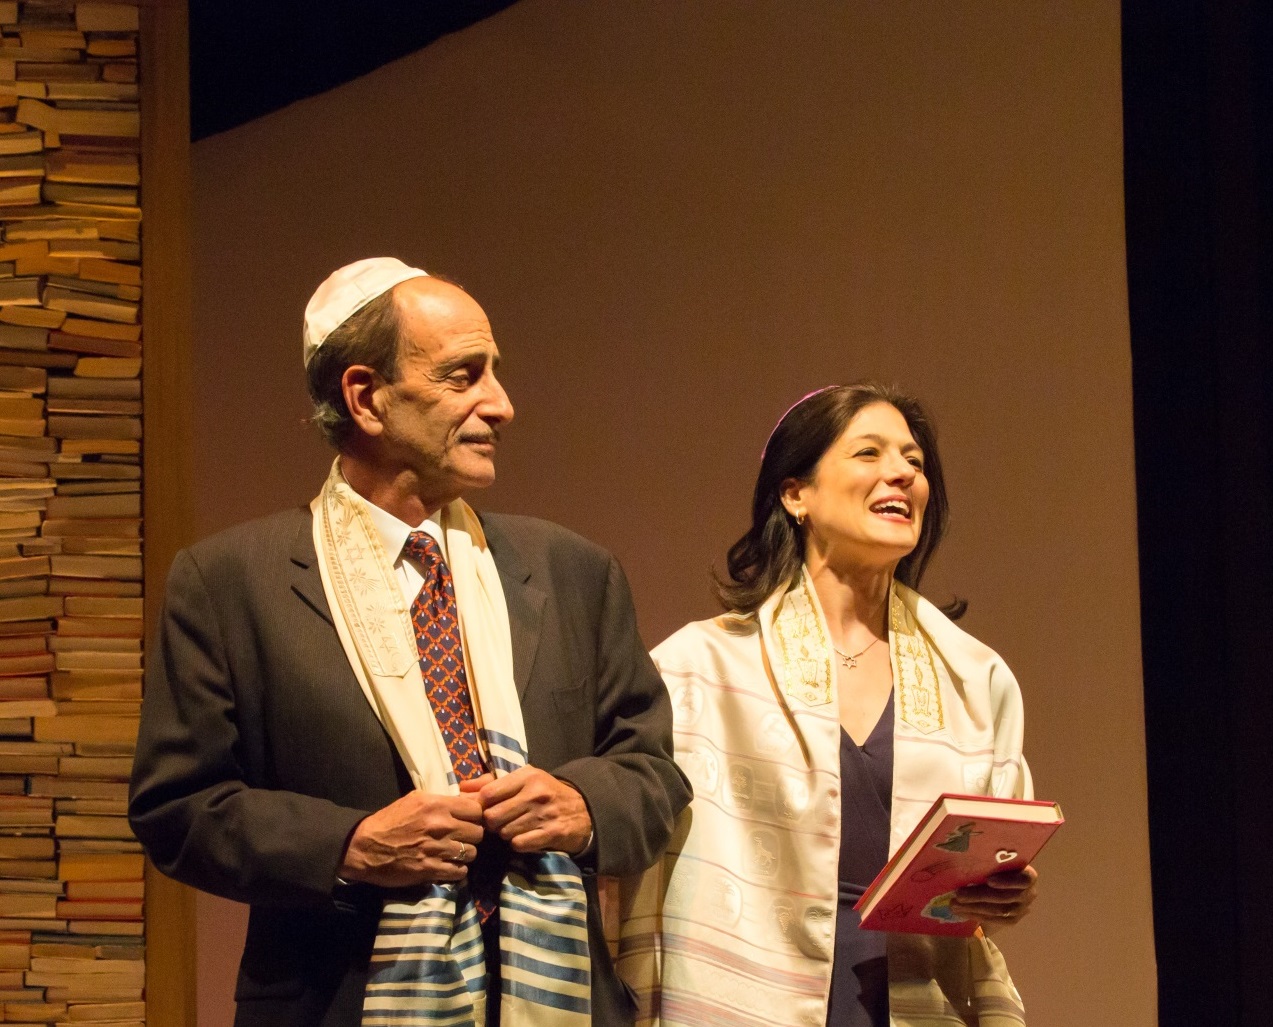 Stagestruck: A lawyer walks into a rabbi’s office…